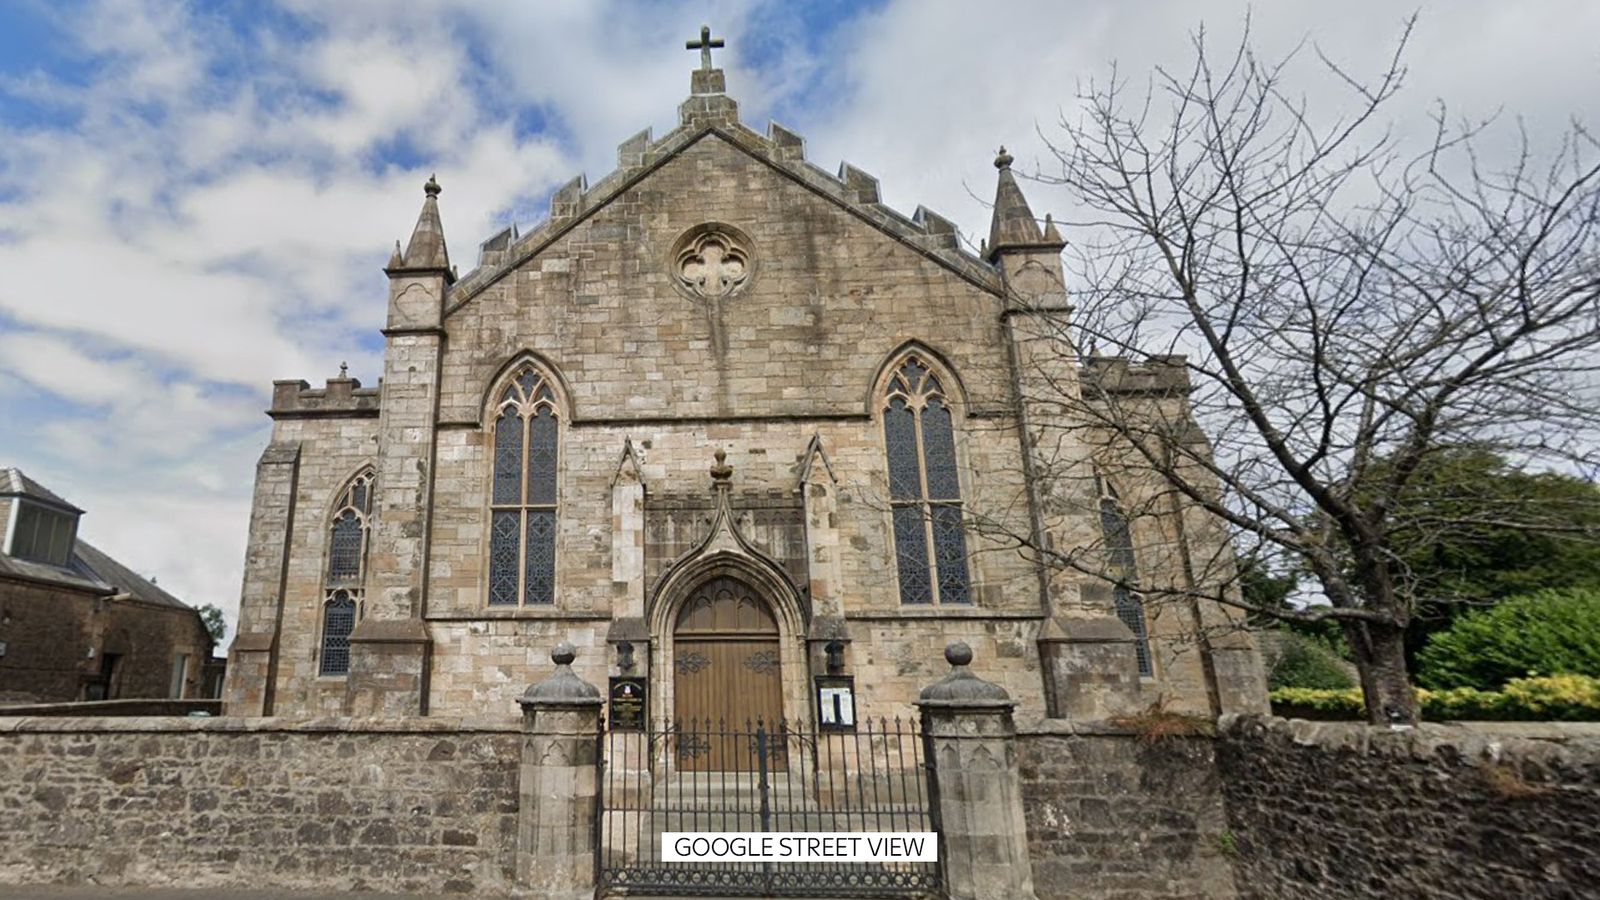 Single noise complaint against Beith Parish Church bell silences 200-year tradition